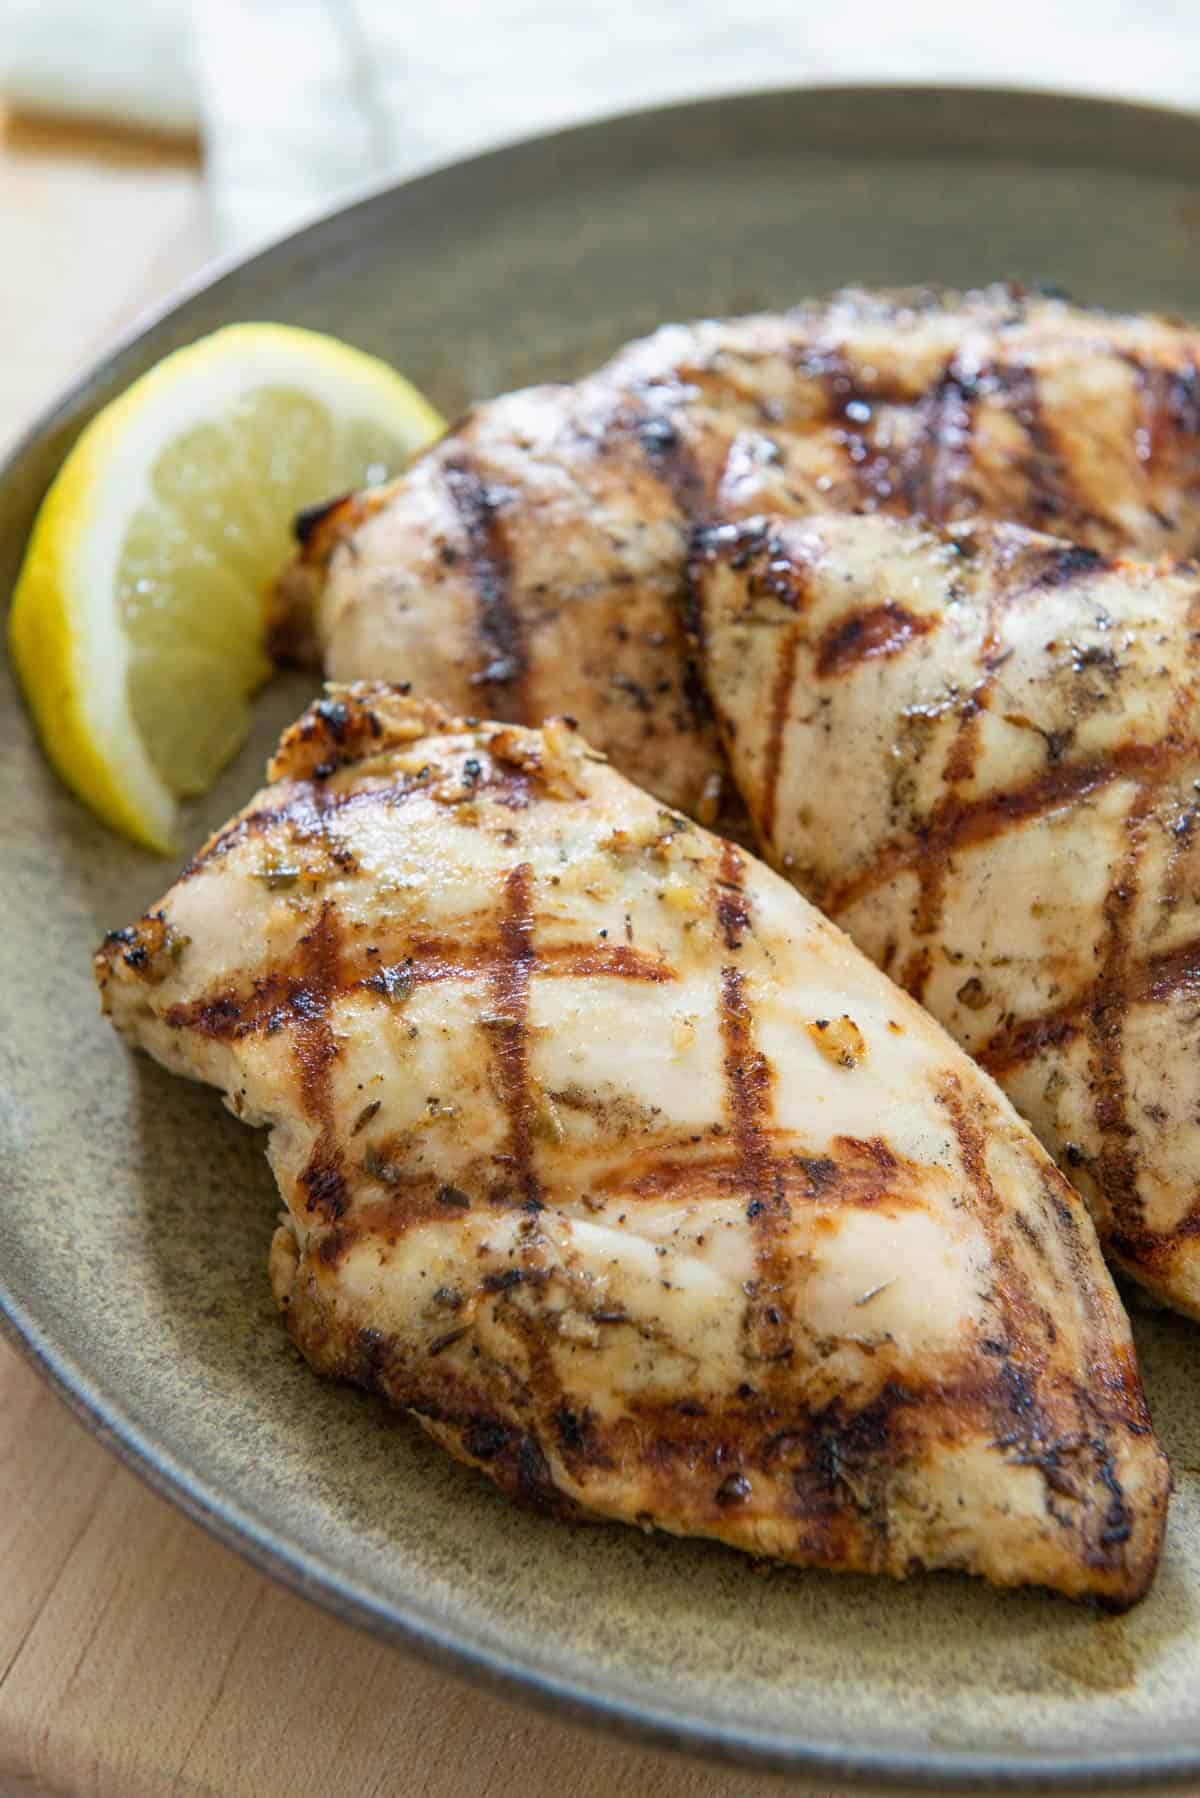 Three Pieces of Grilled Chicken on a Plate with Lemon